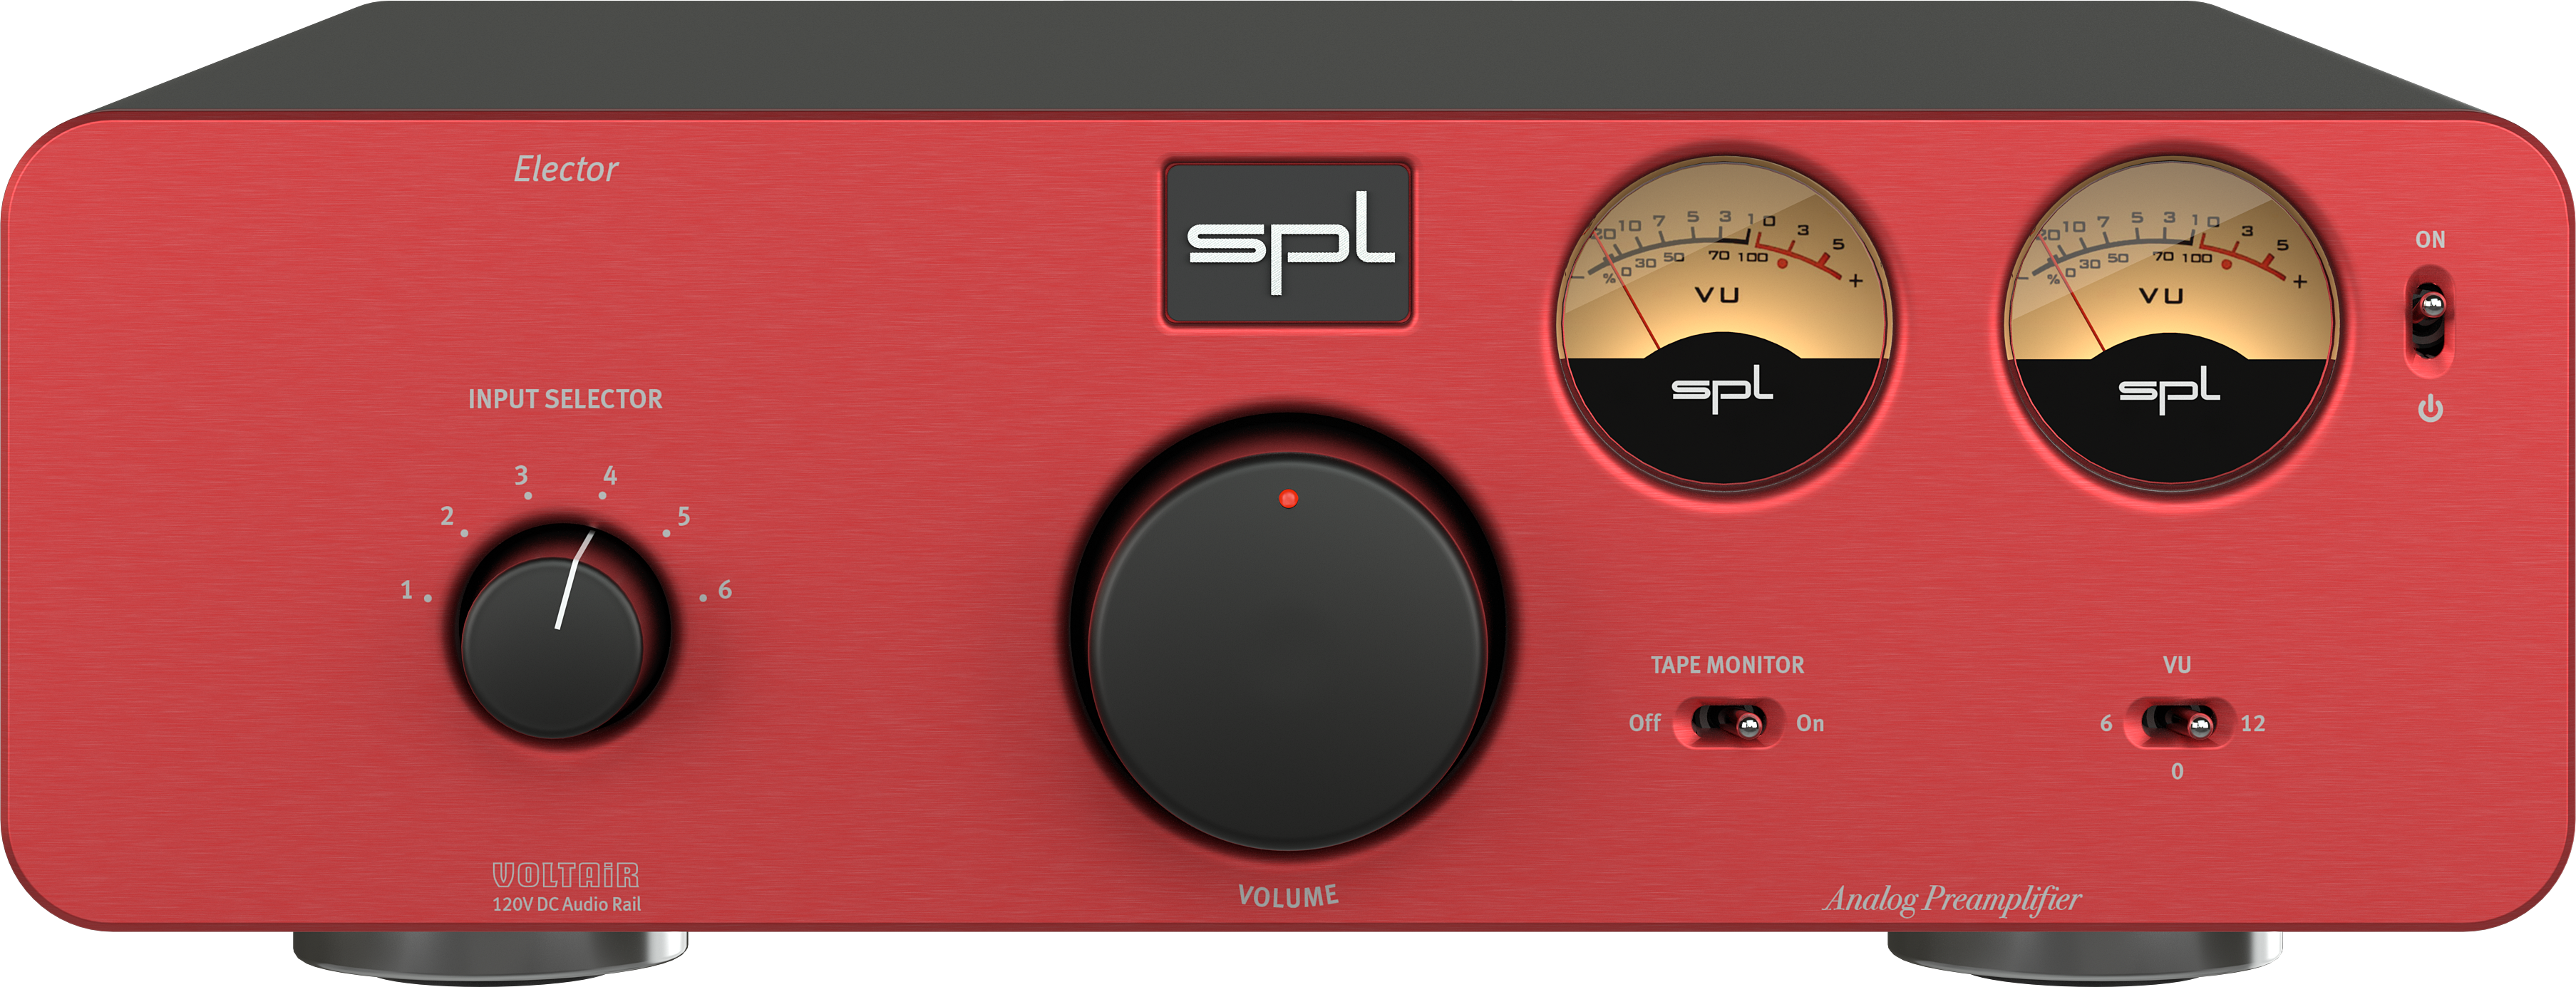 Spl Elector Red - Preamp - Main picture